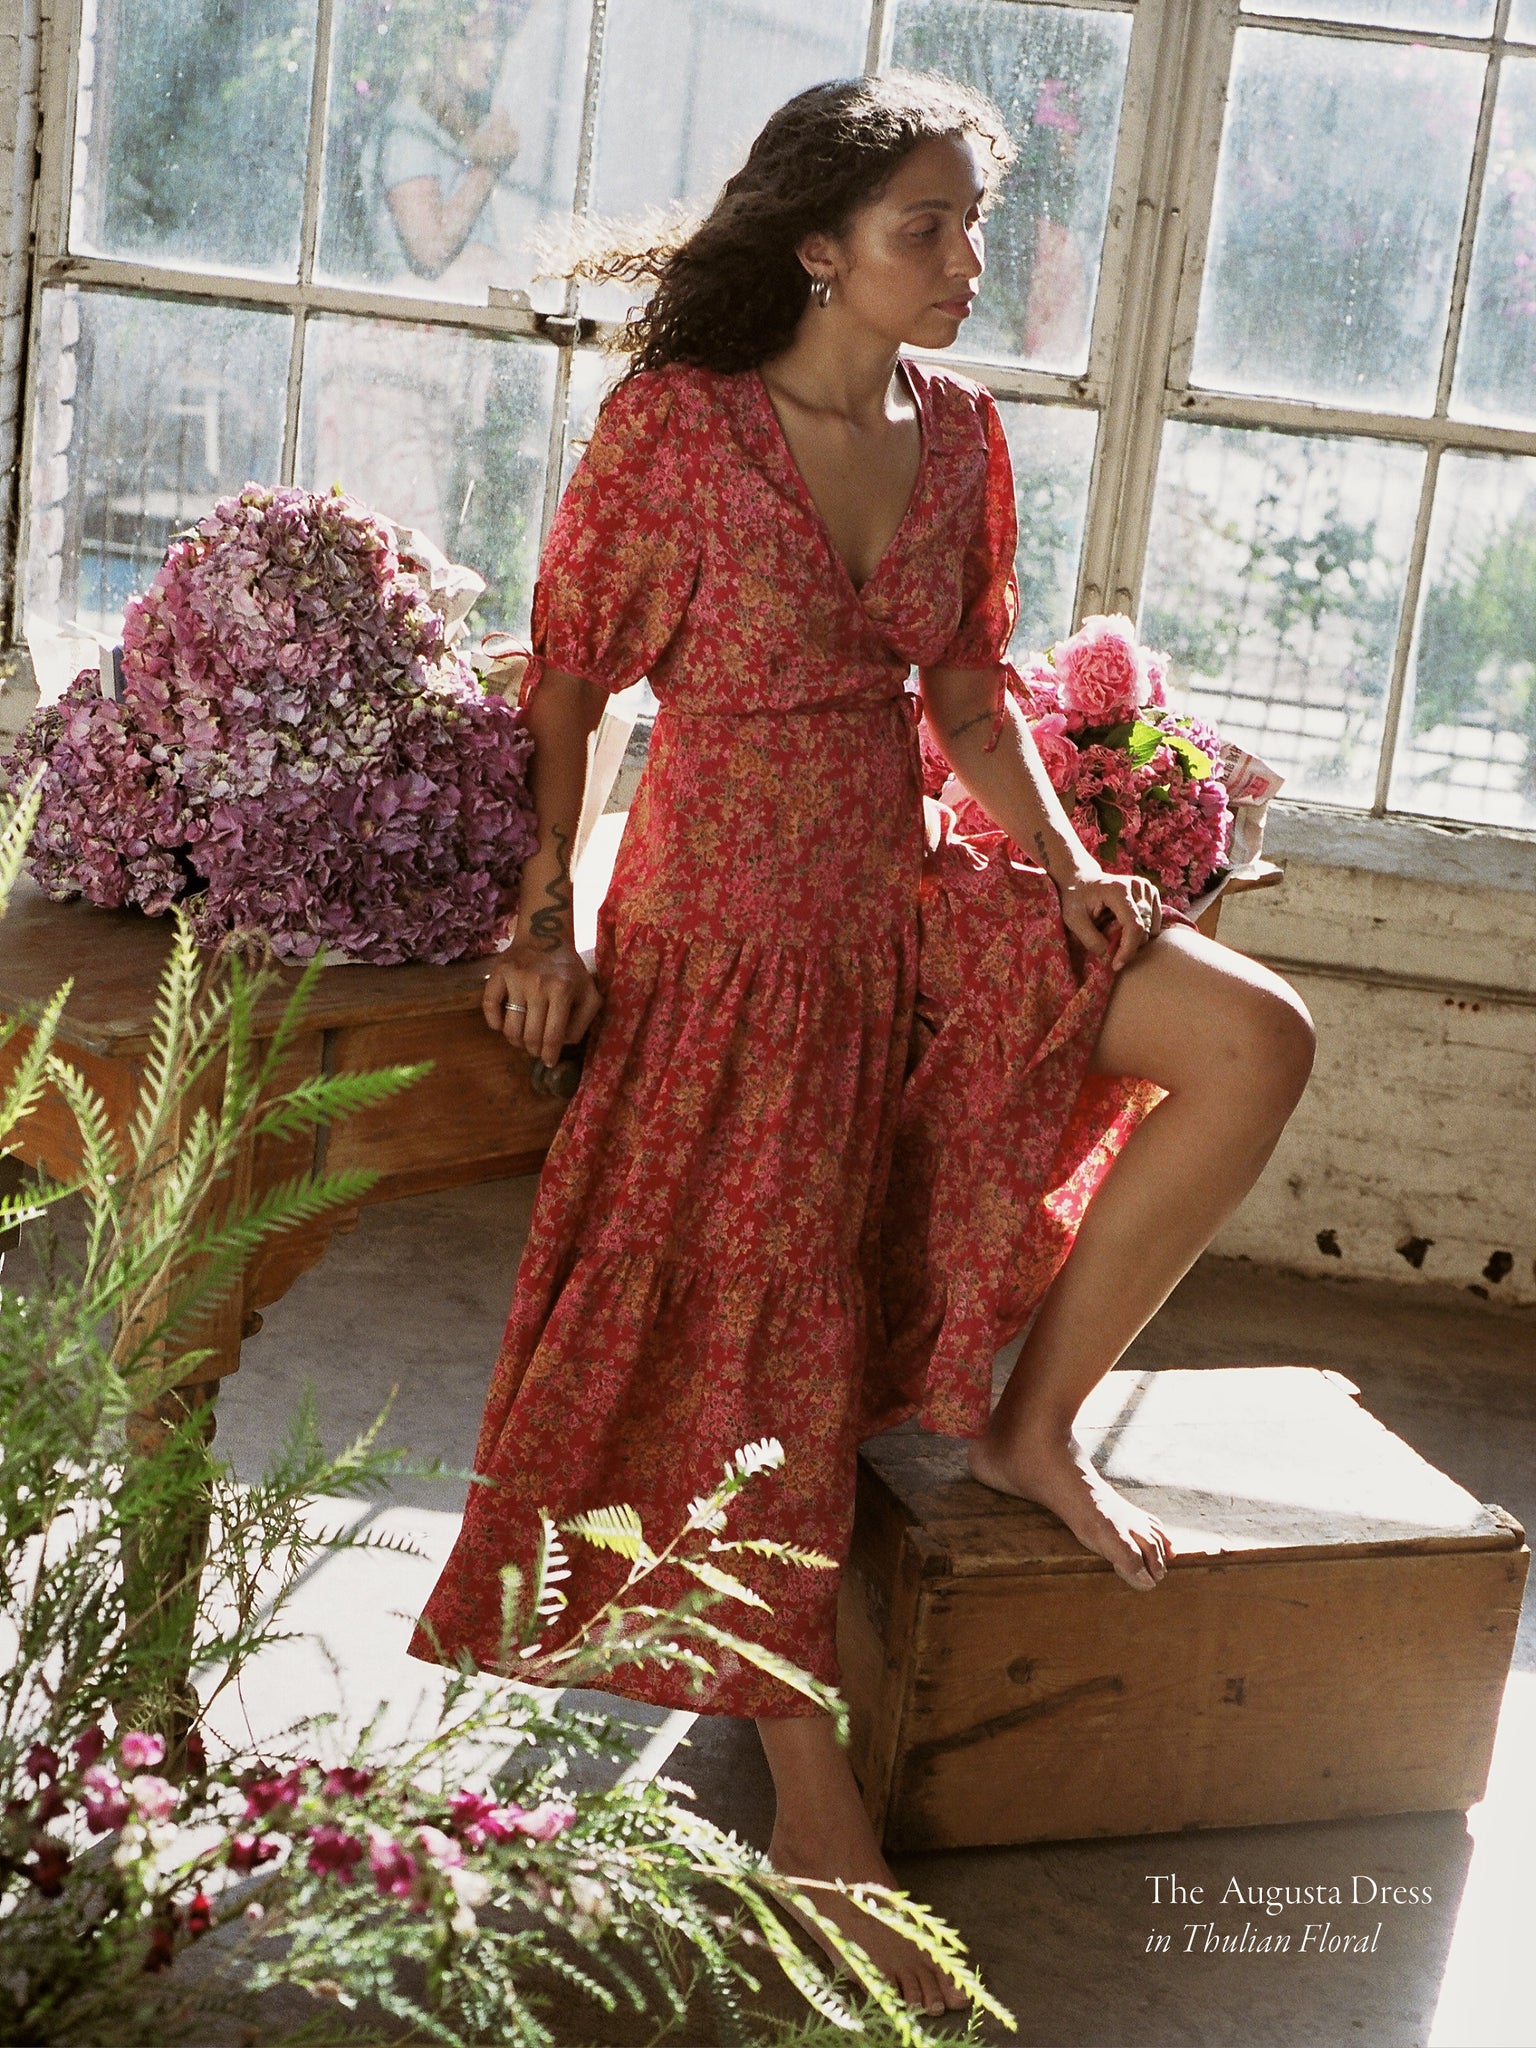 The Augusta Dress in Thulian Floral